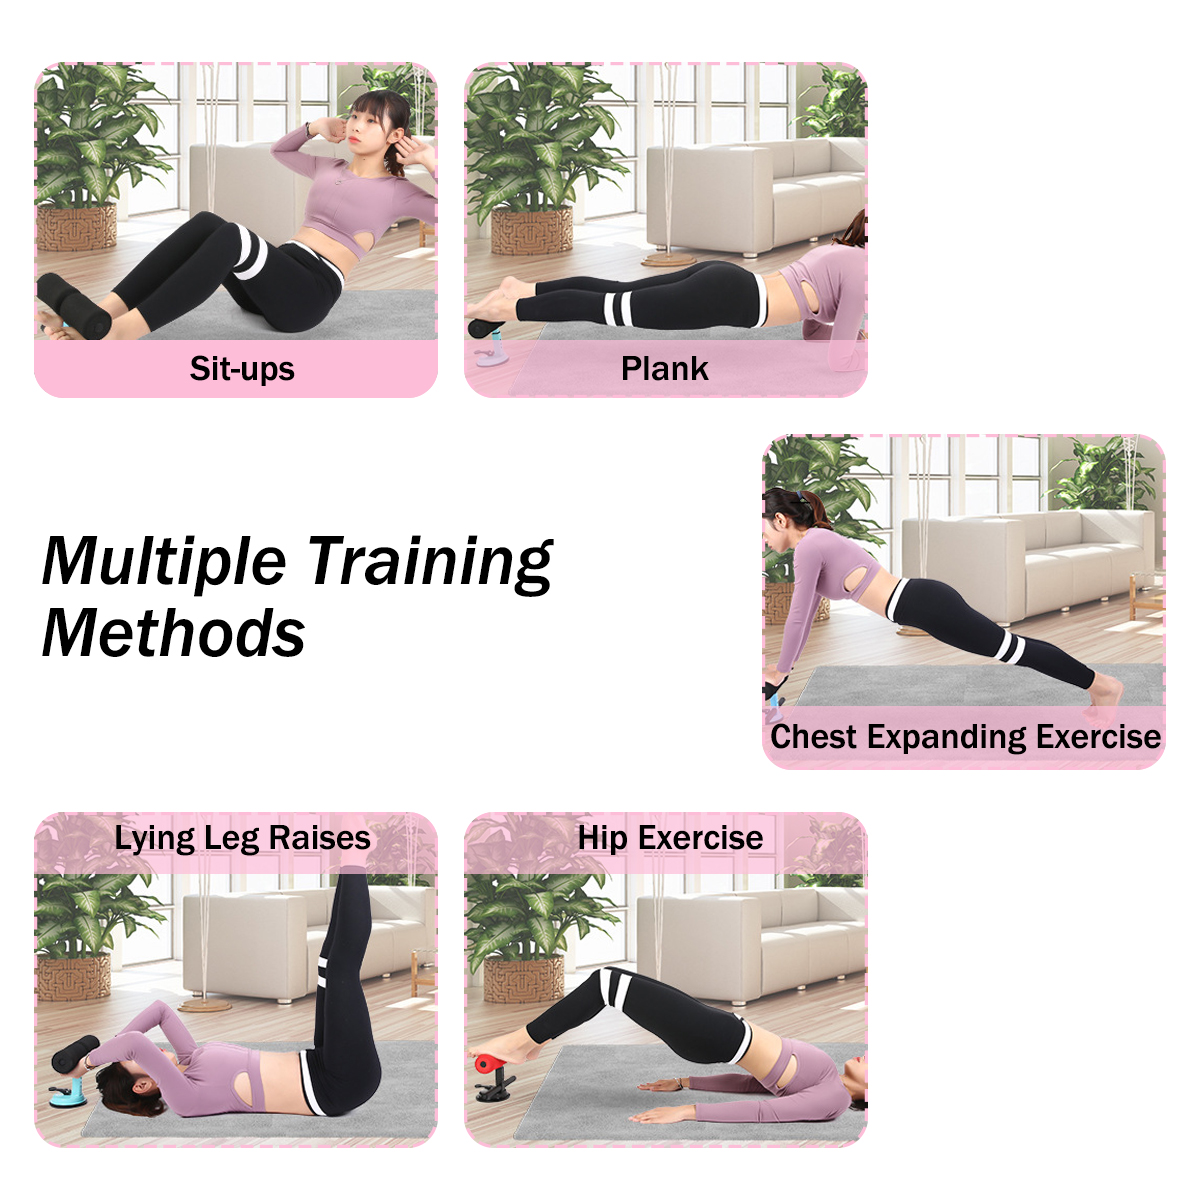 Sit-up-Assistant-Device-4-Levels-Adjustable-Self-Suction-Sit-ups-Bar-Fitness-Abdominal-Muscle-Traini-1679019-6